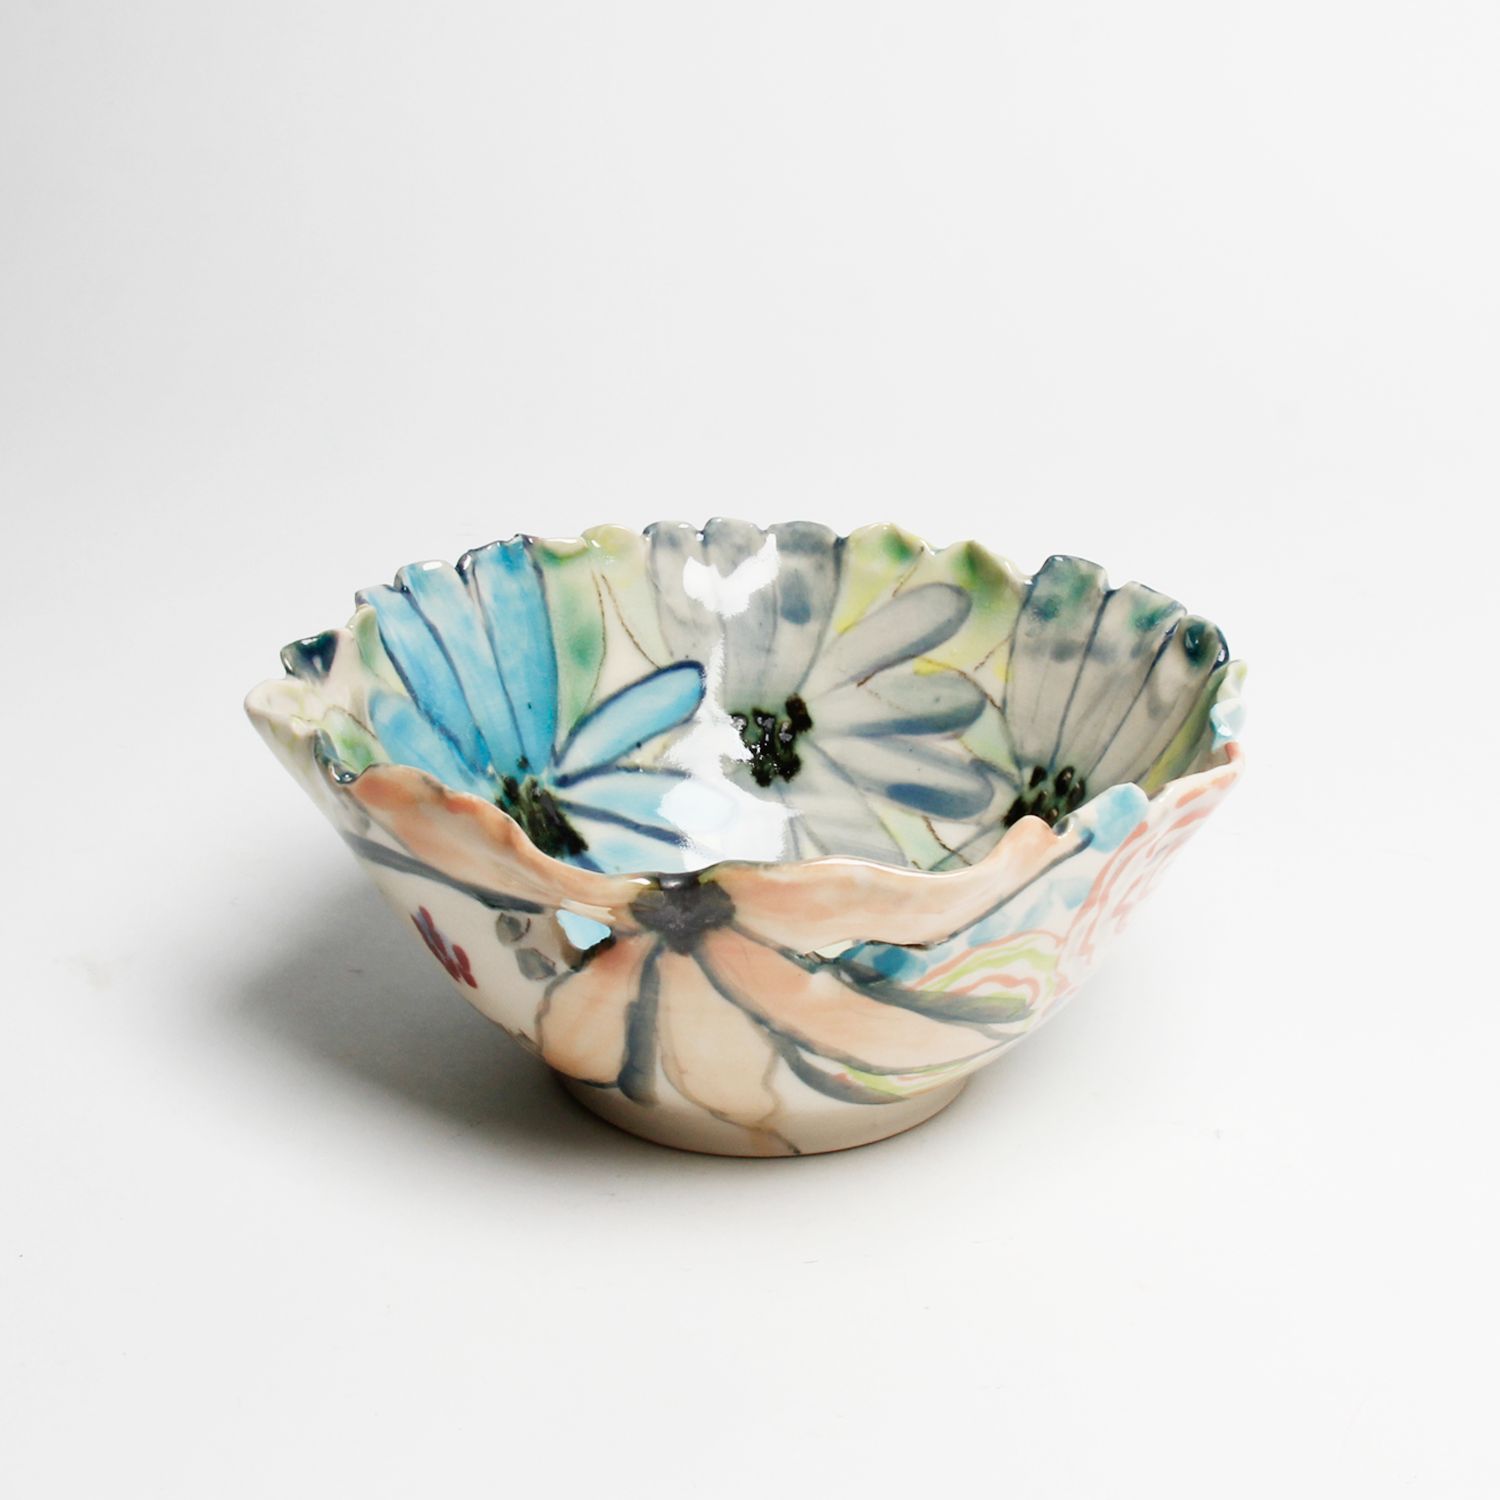 Susan Card: Floral Bowl 1 Product Image 2 of 4